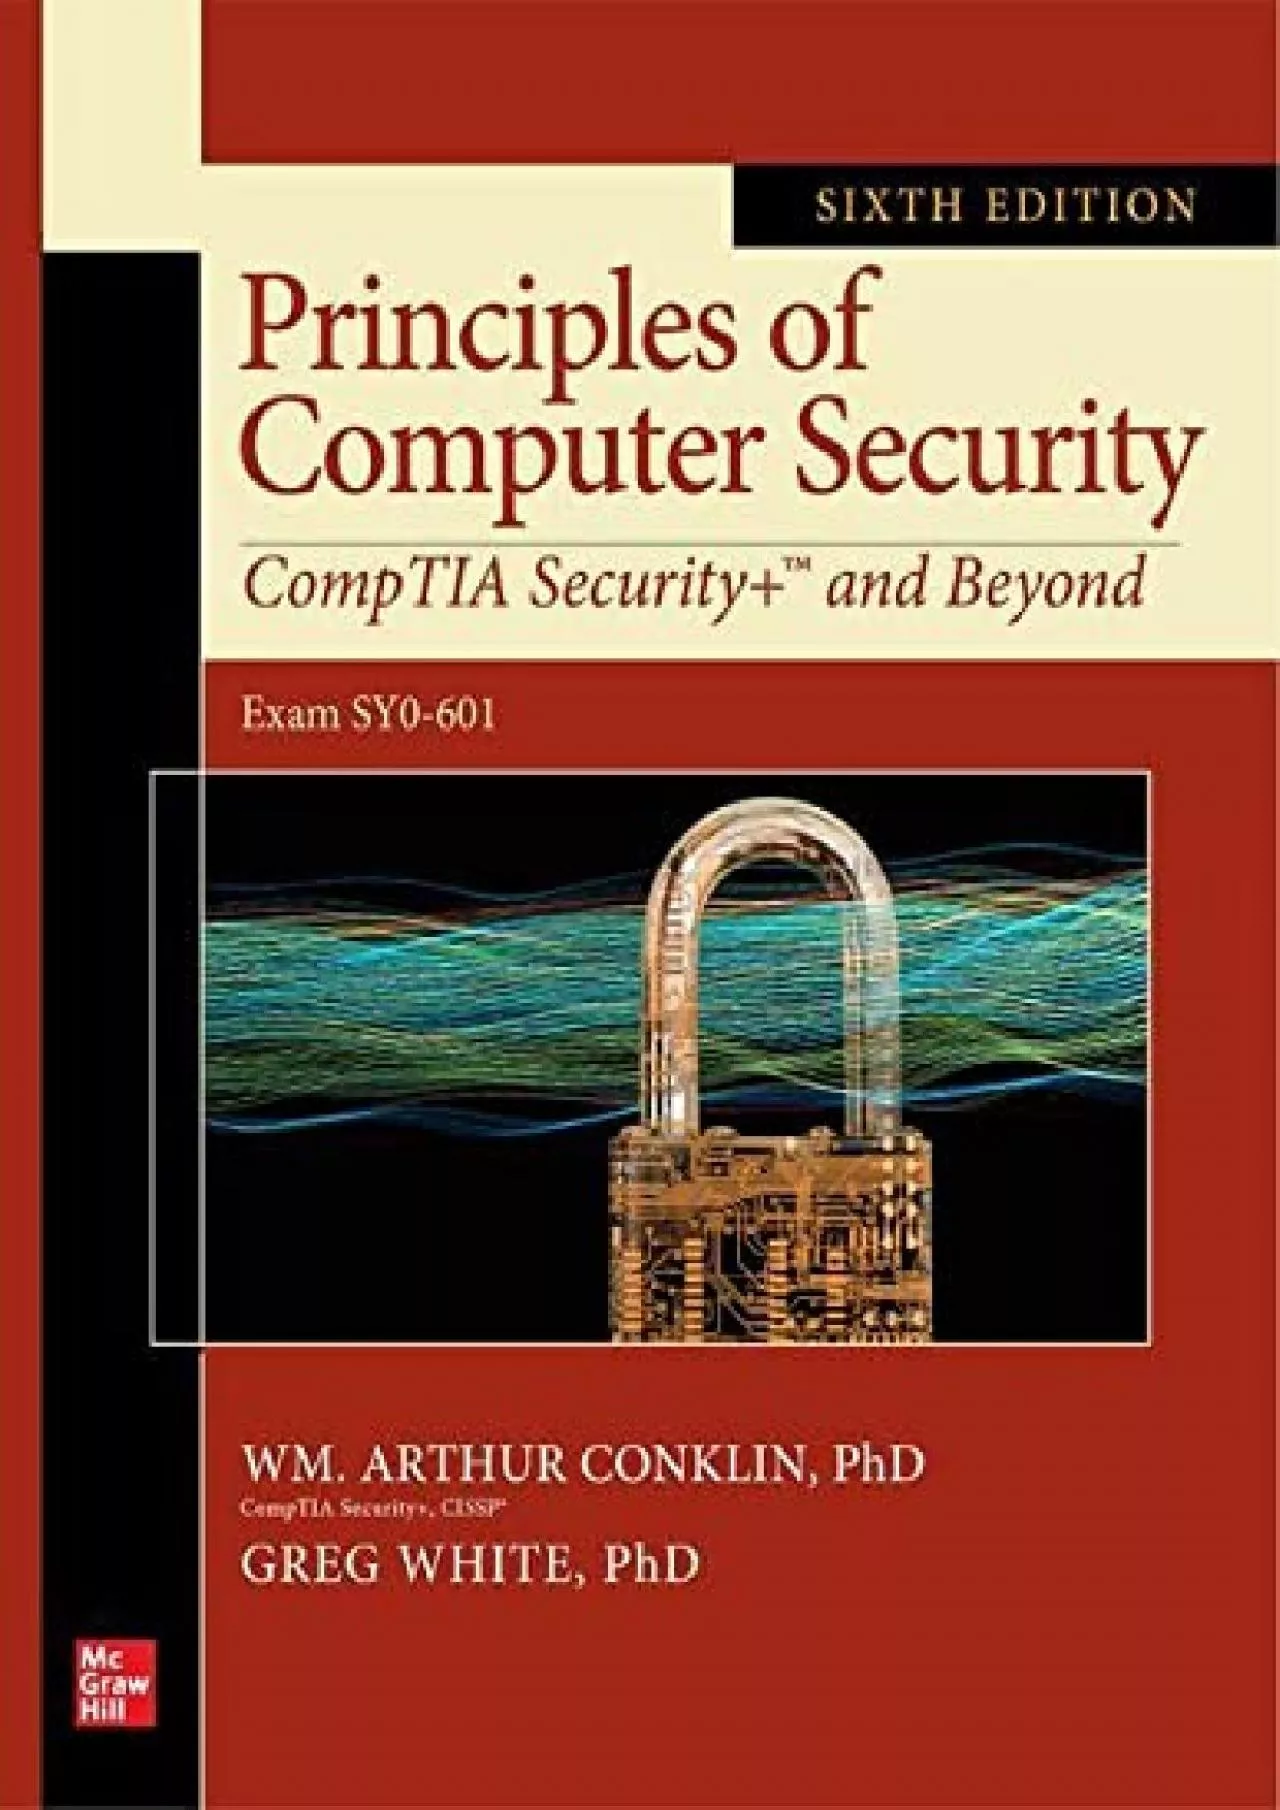 (BOOS)-Principles of Computer Security: CompTIA Security+ and Beyond, Sixth Edition (Exam